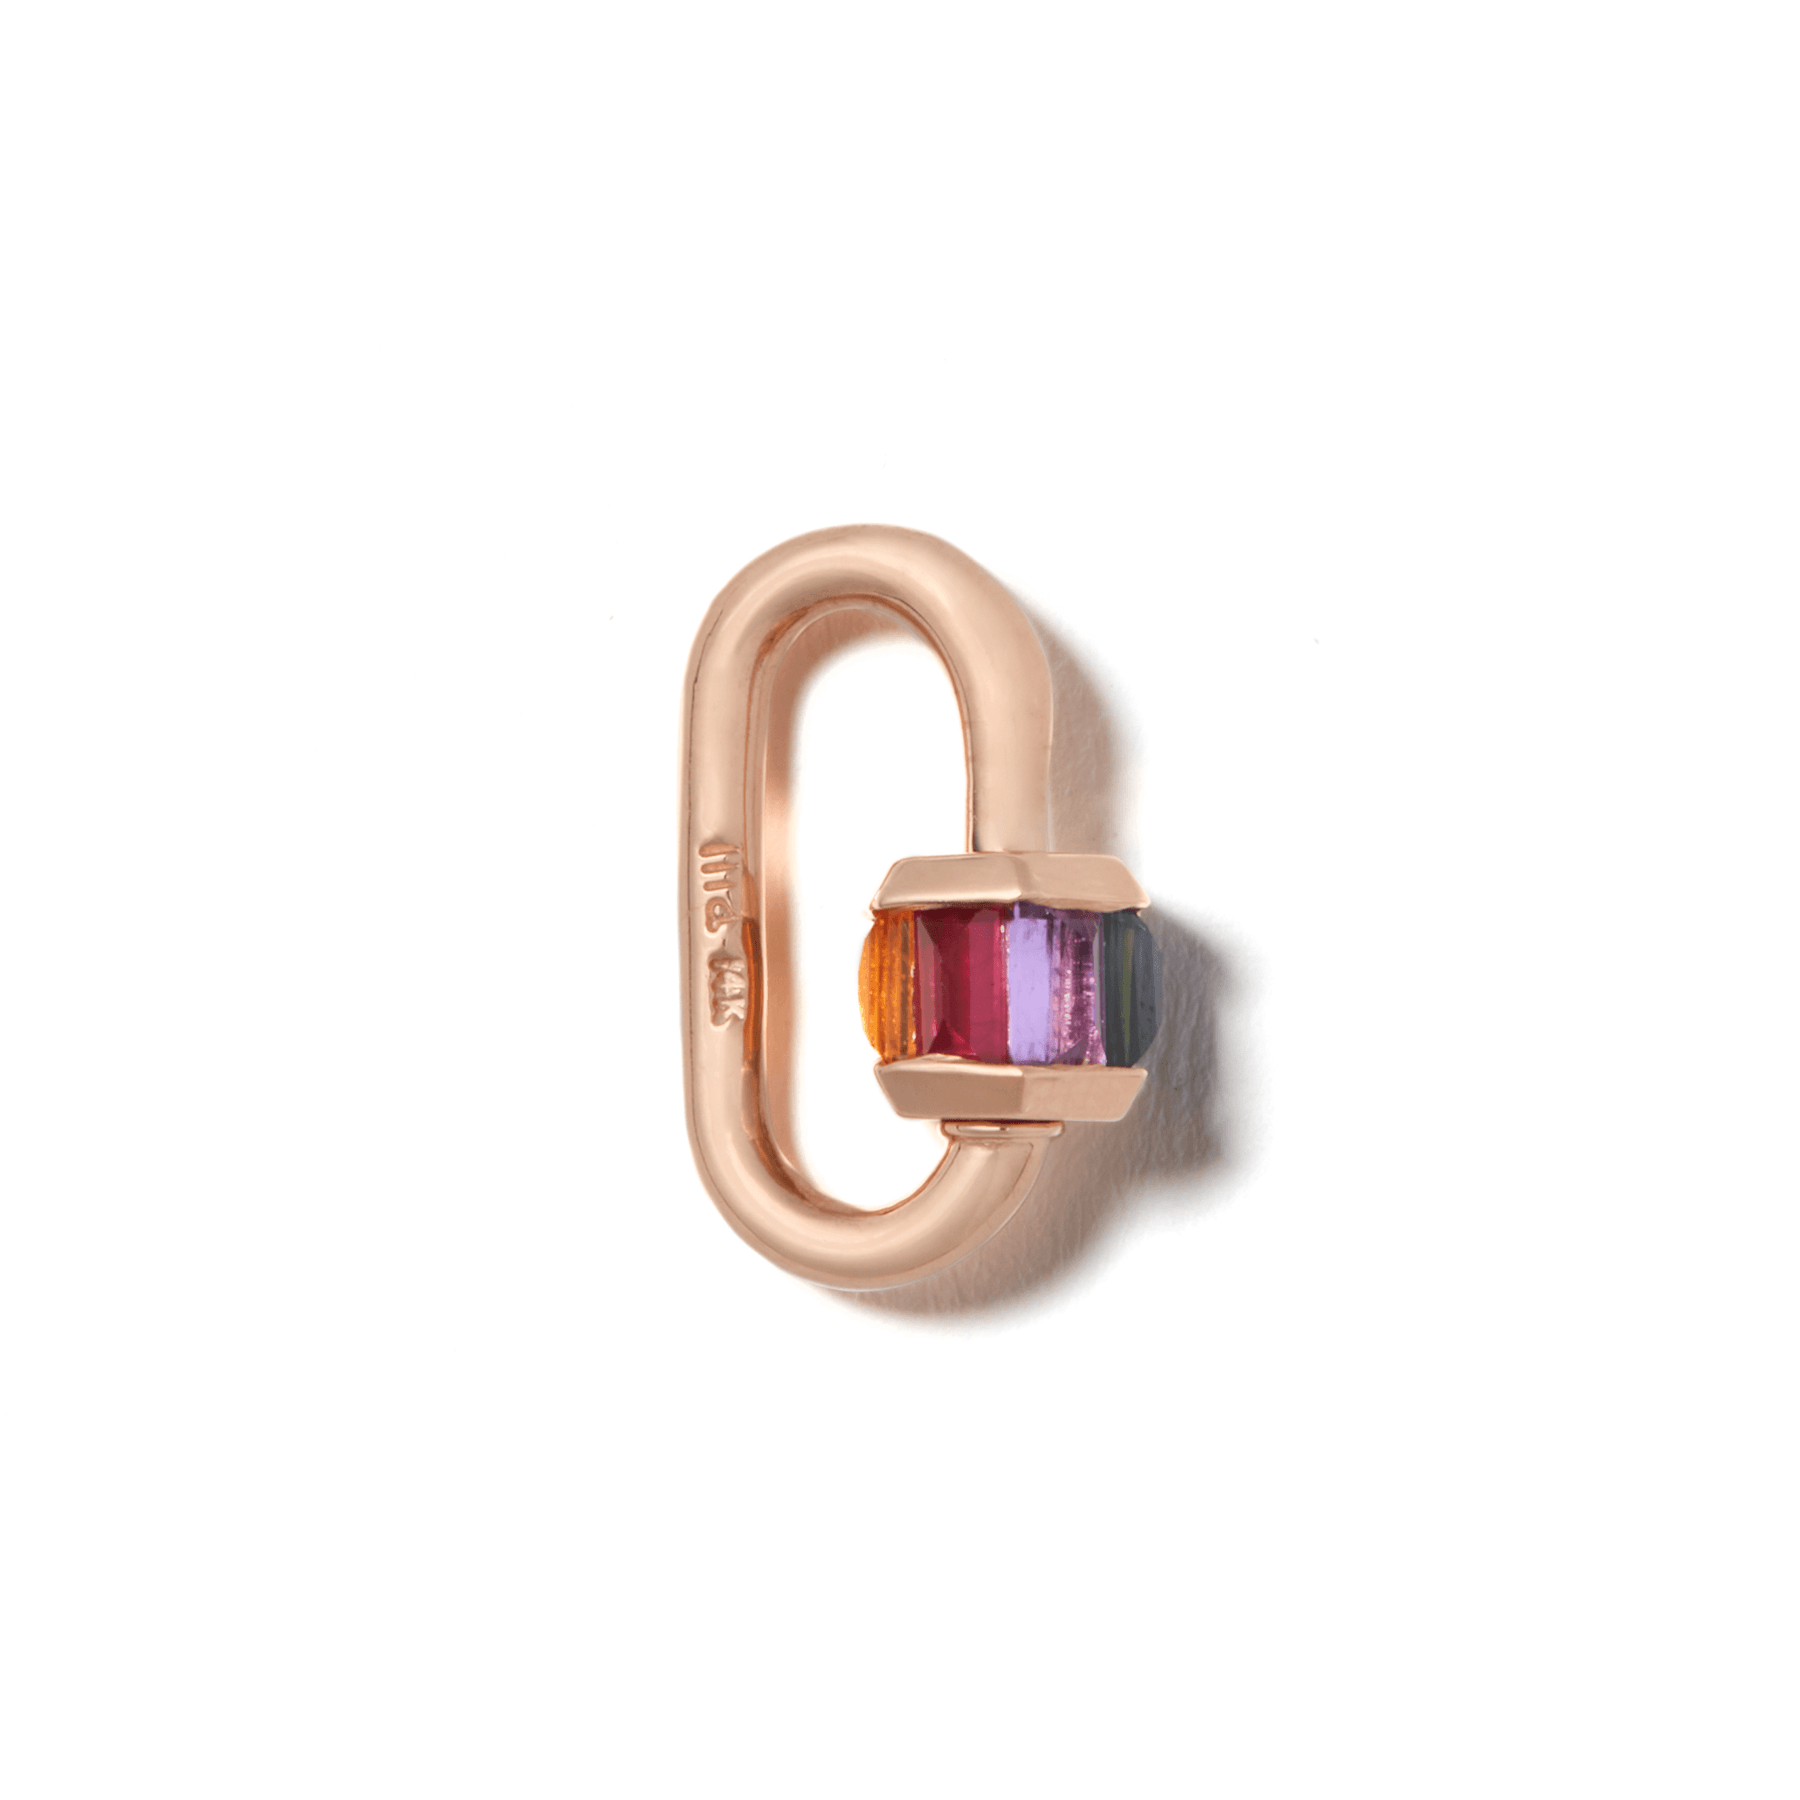 Rose gold roygbiv jewelry lock against white backdrop 